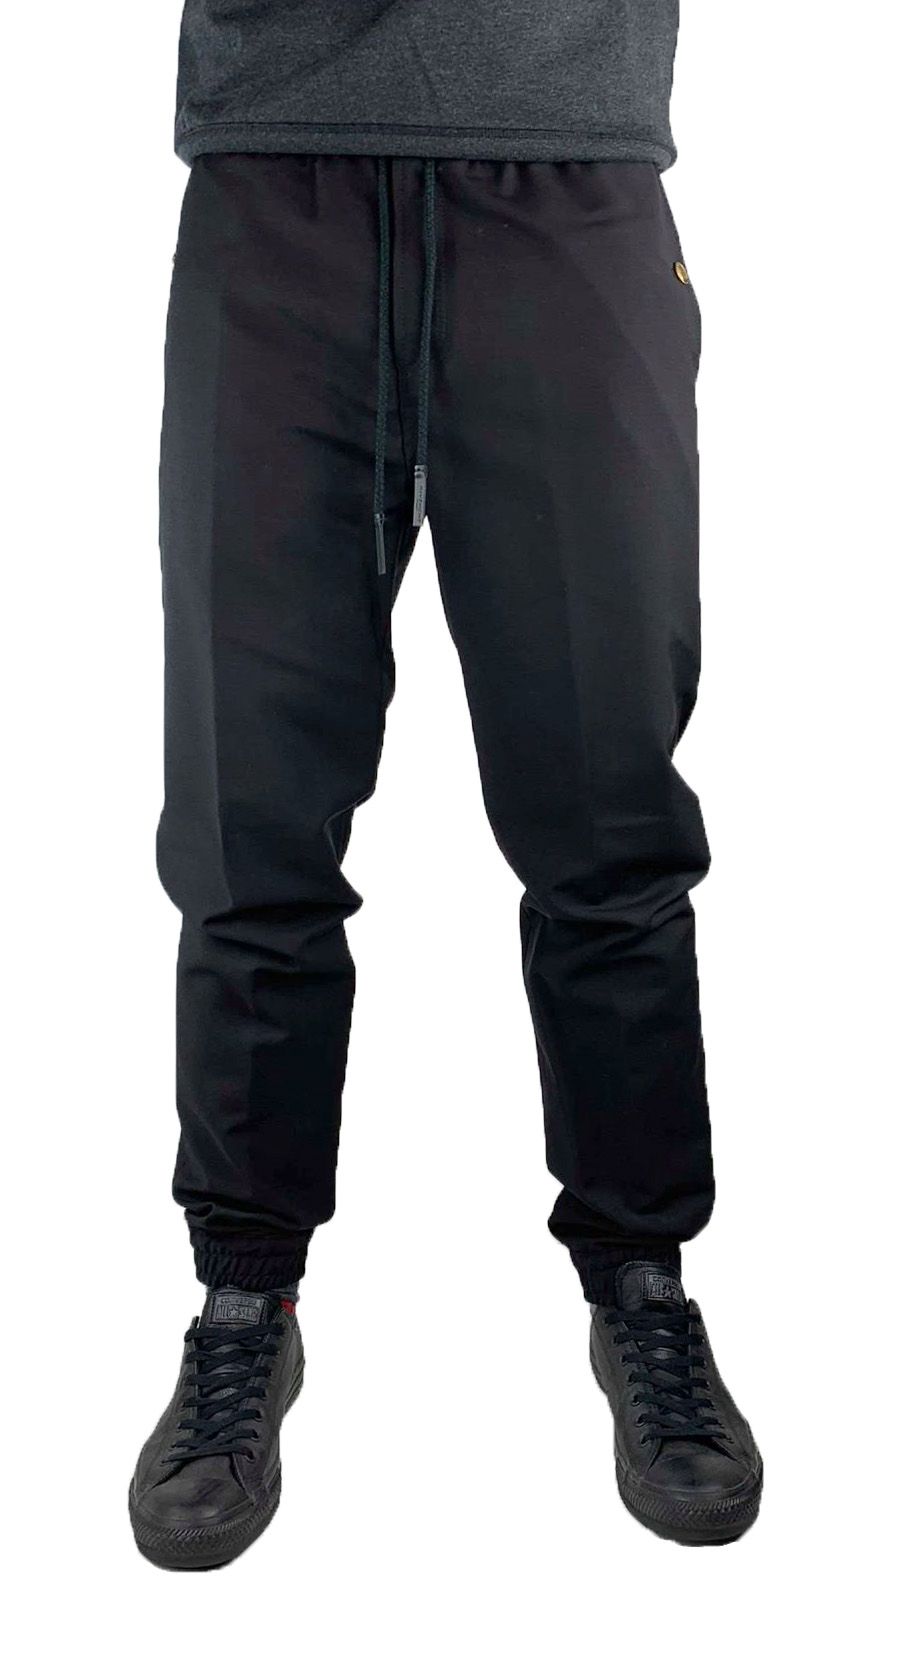 Givenchy BM505Q110H 001 Sweatpants. Sweatpant Bottoms With Elasticated waistband and ankles. Back Pockets. antique gold-finish metal 4G buttons on the side pockets. Brand logo printed on drawsting waist adjusters. 100% Black wool and mohair jogging pant